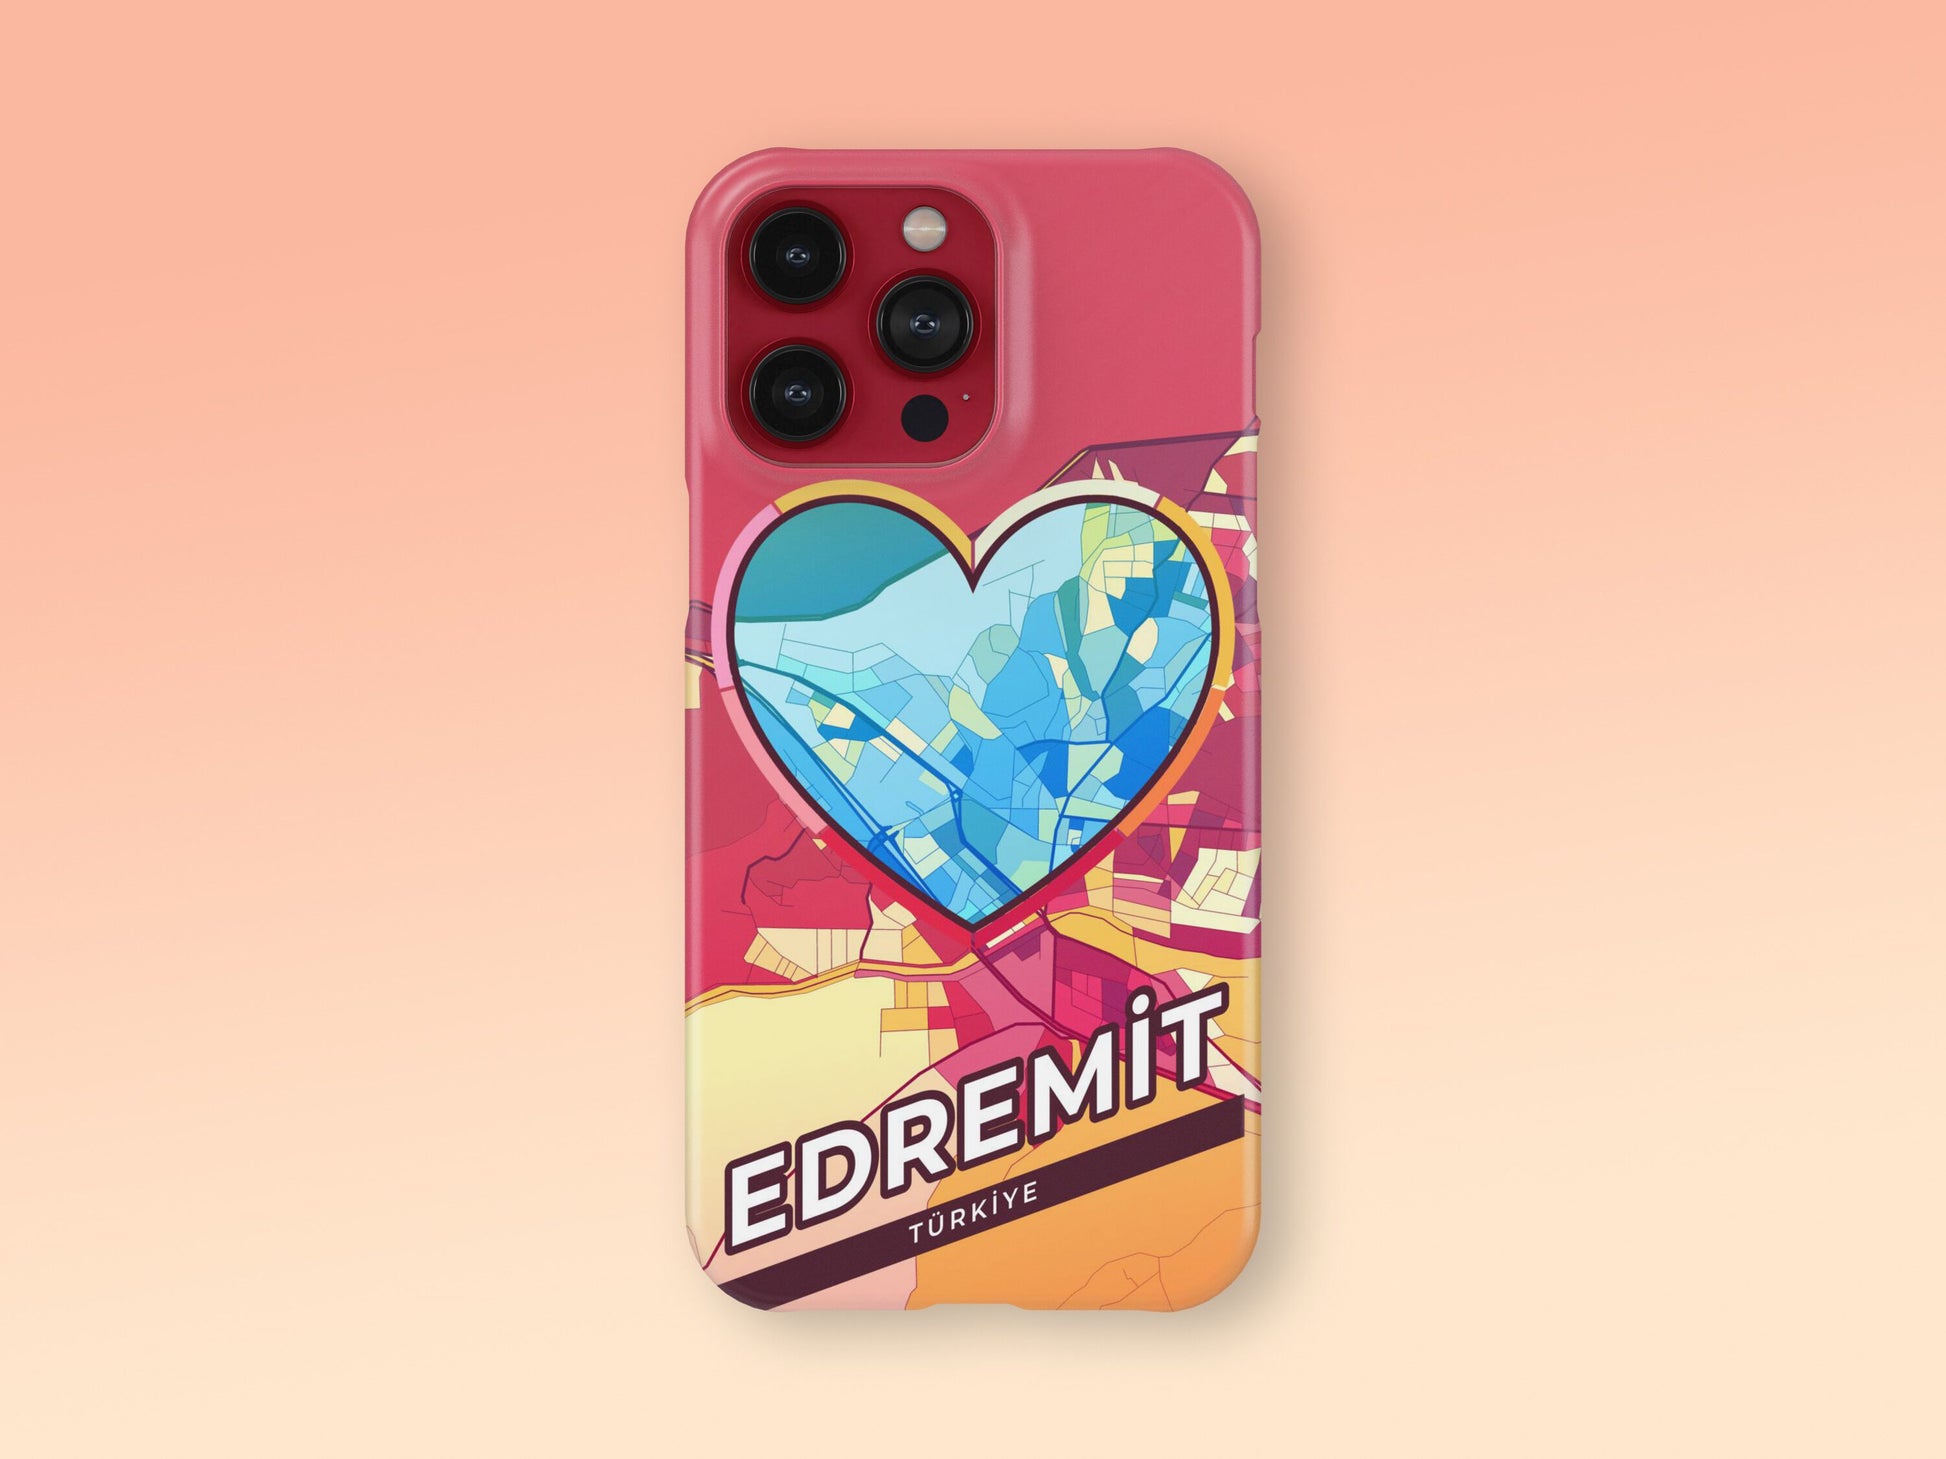 Edremit Turkey slim phone case with colorful icon. Birthday, wedding or housewarming gift. Couple match cases. 2